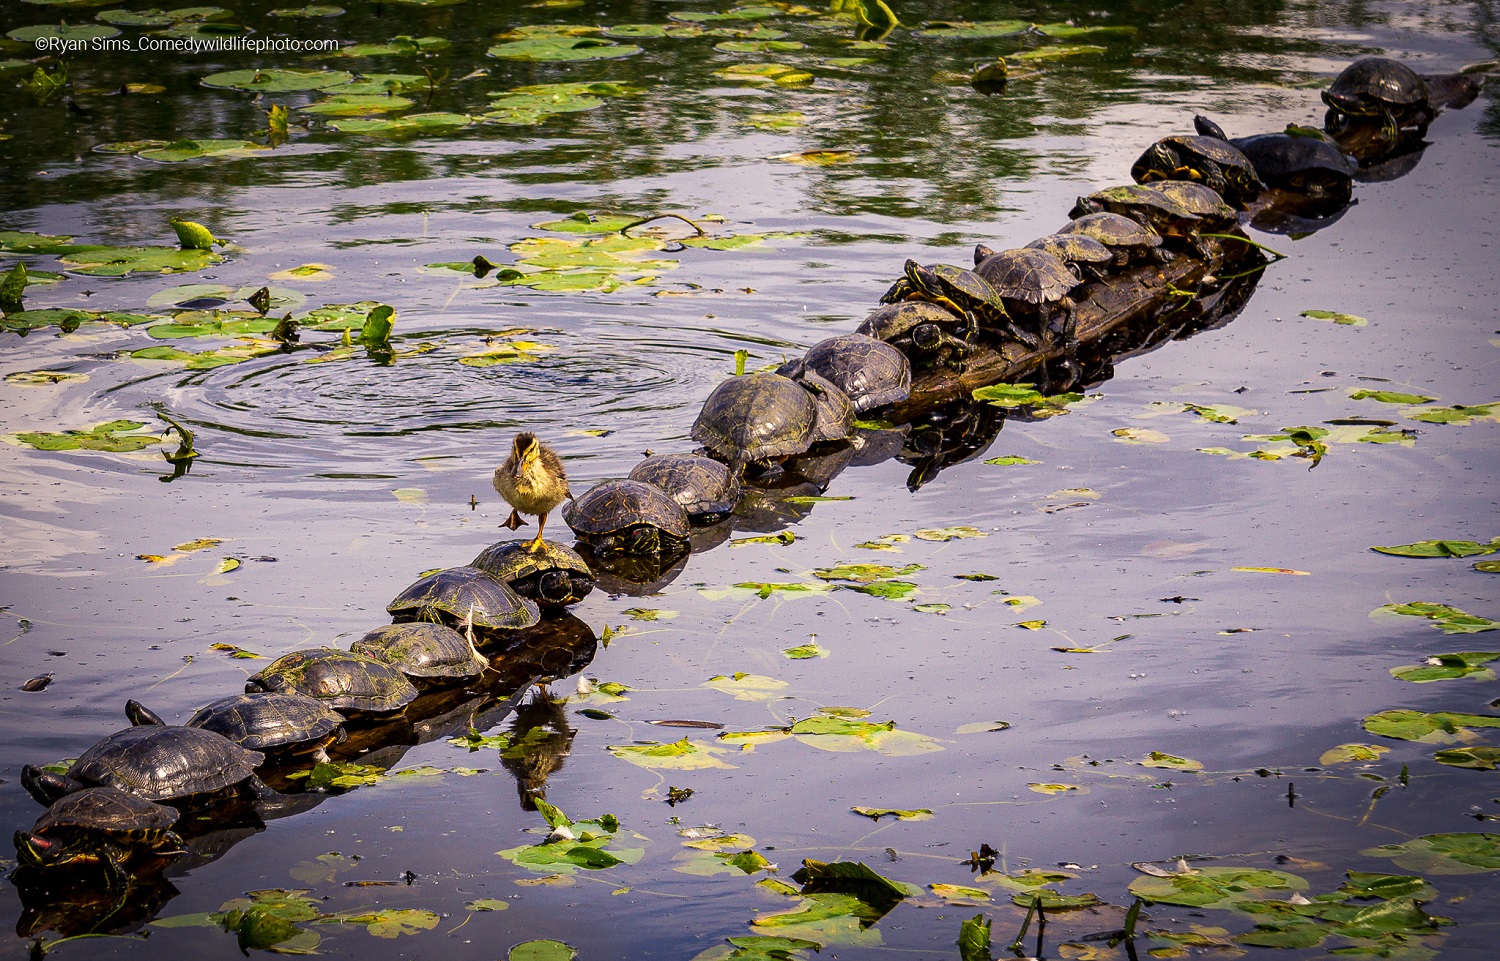 Duckling walking across turtles' backs on a Lilli pad-covered pond